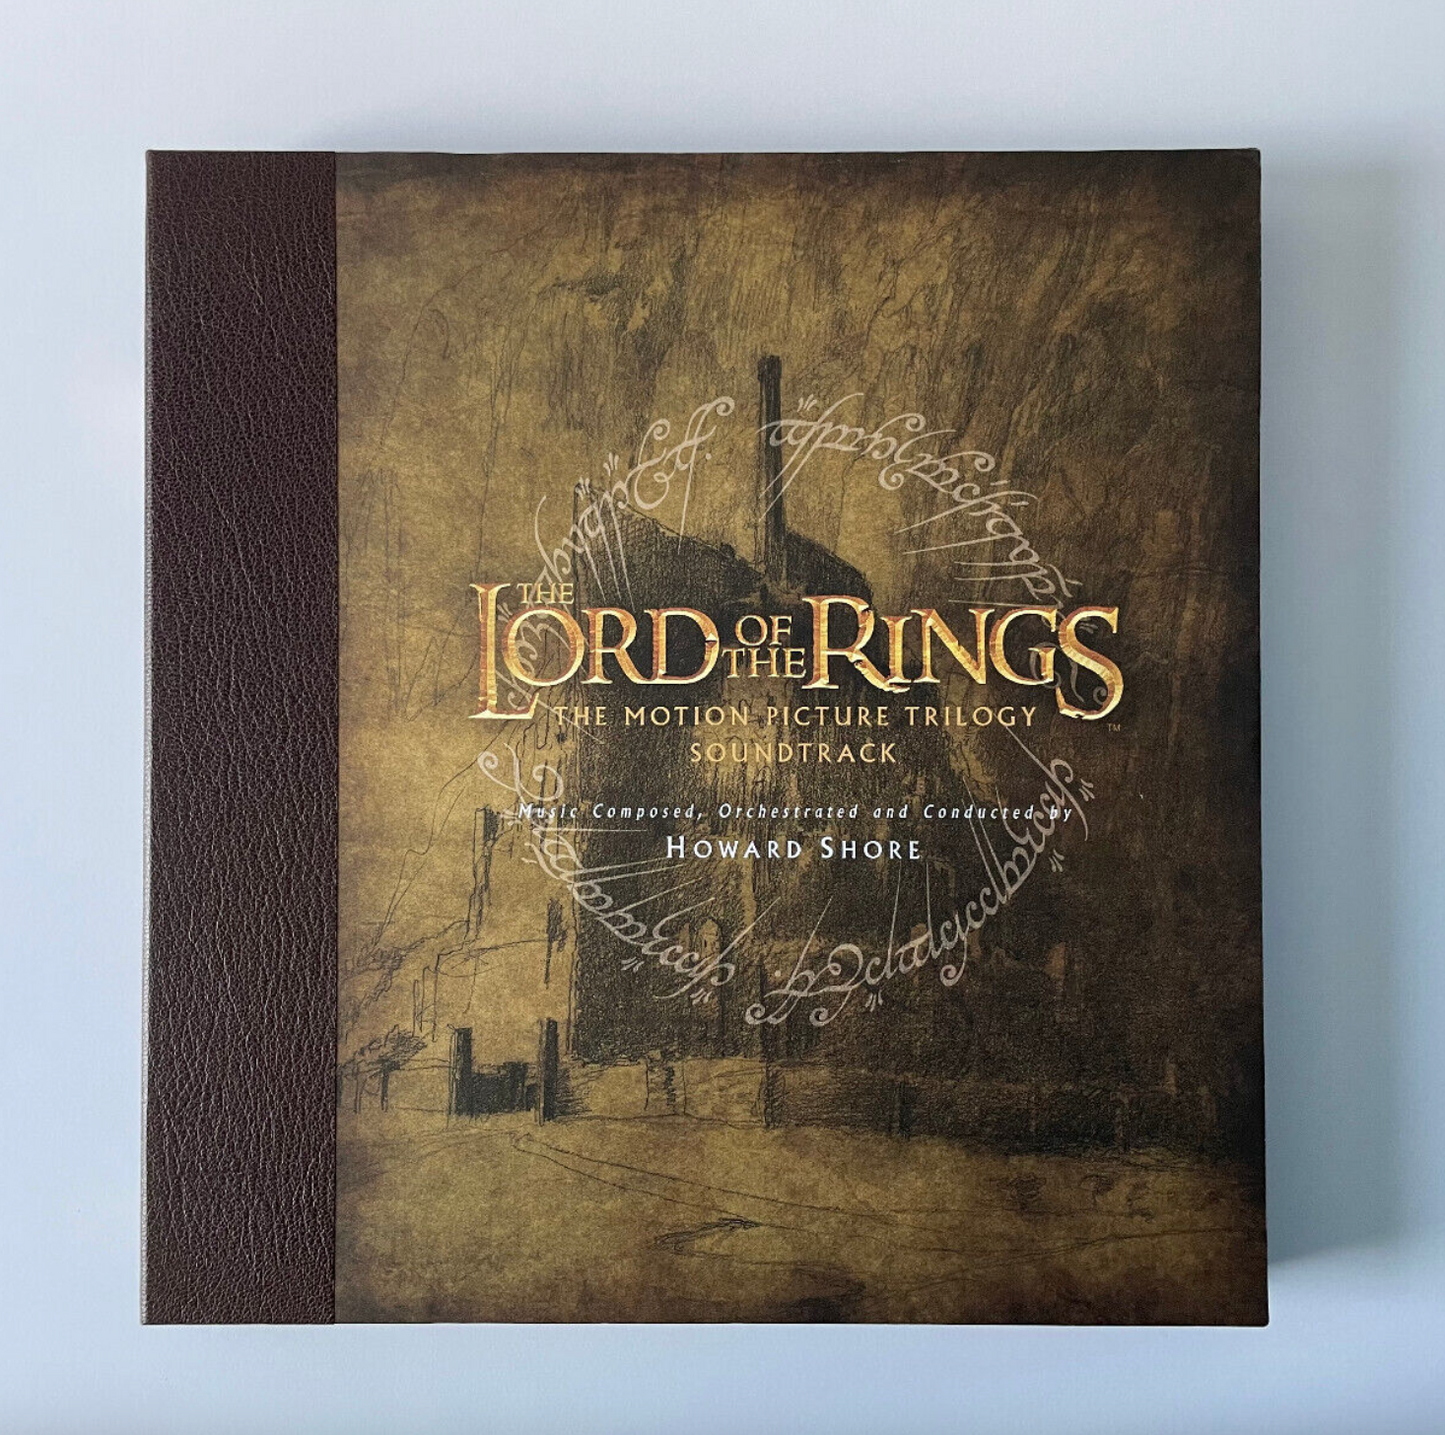 Lord of the Rings Vinyls